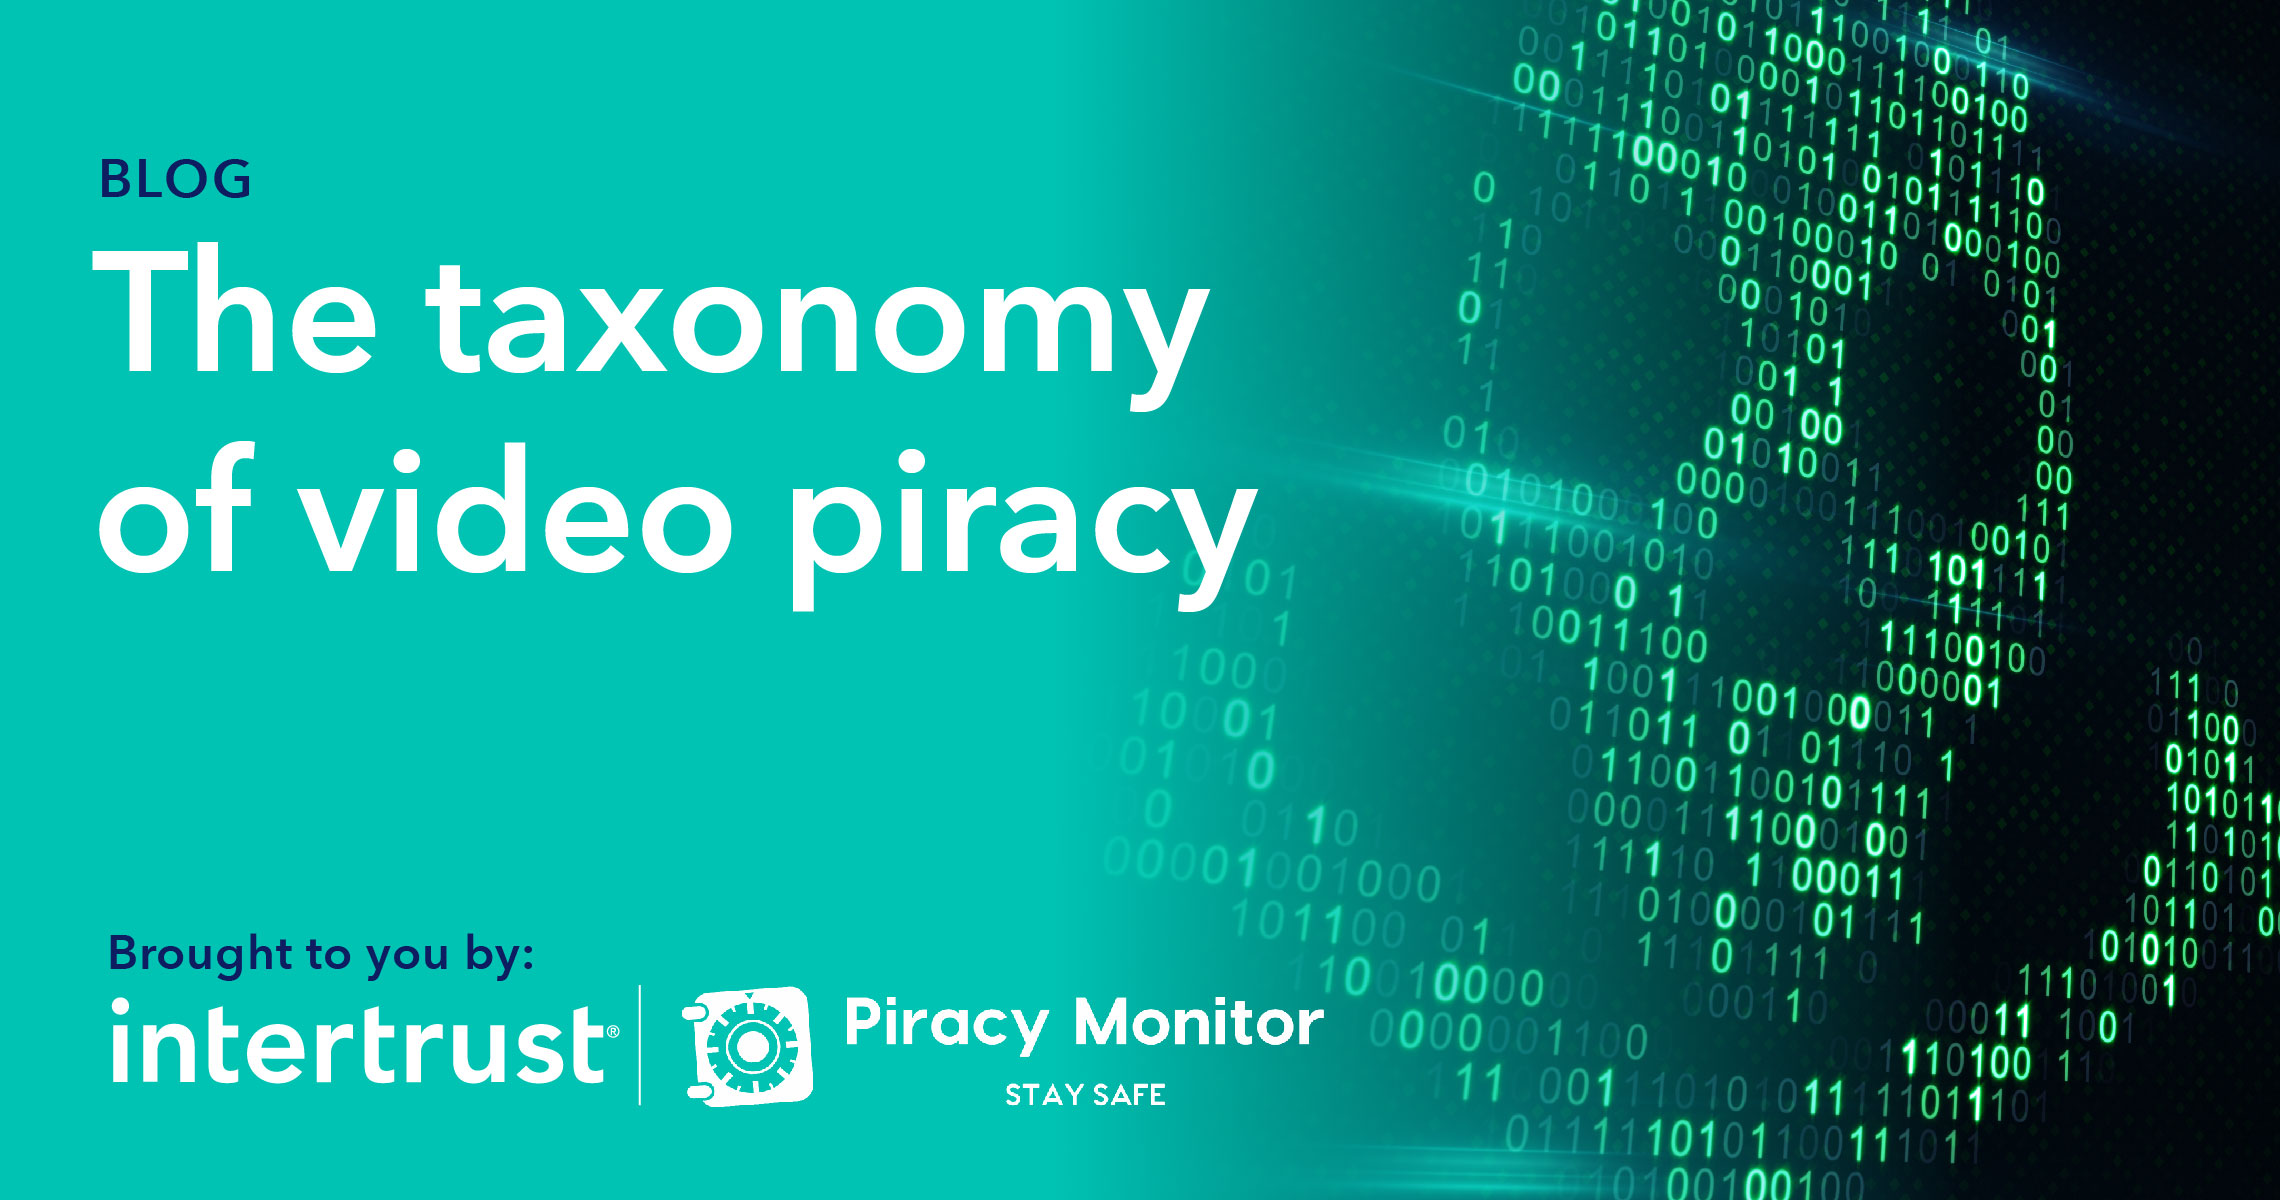 The forms of video piracy: there’s a taxonomy for that hero graphic